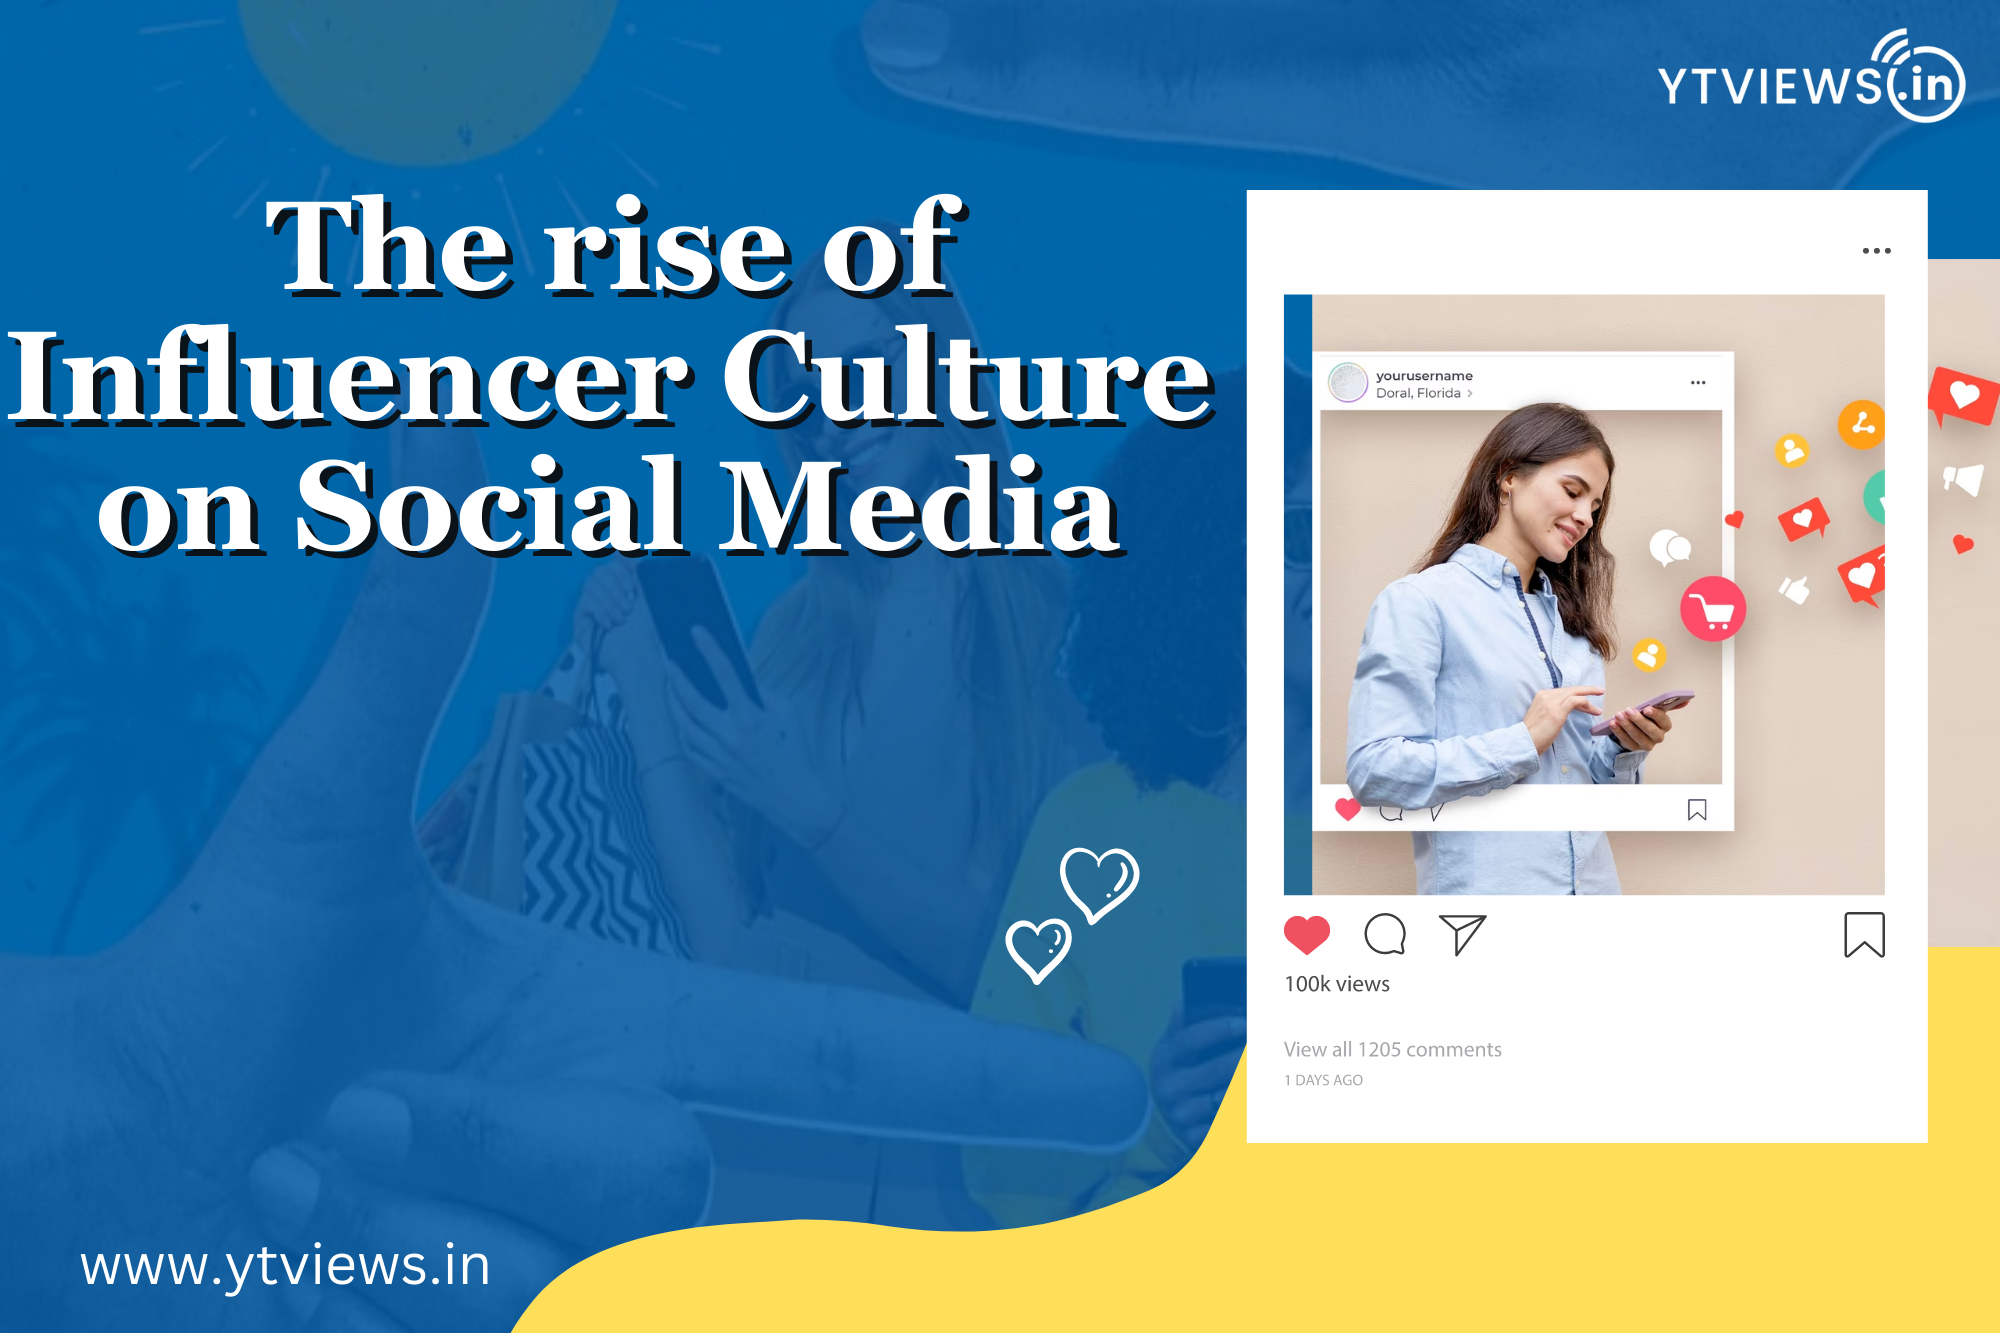 The rise of influencer culture on social media